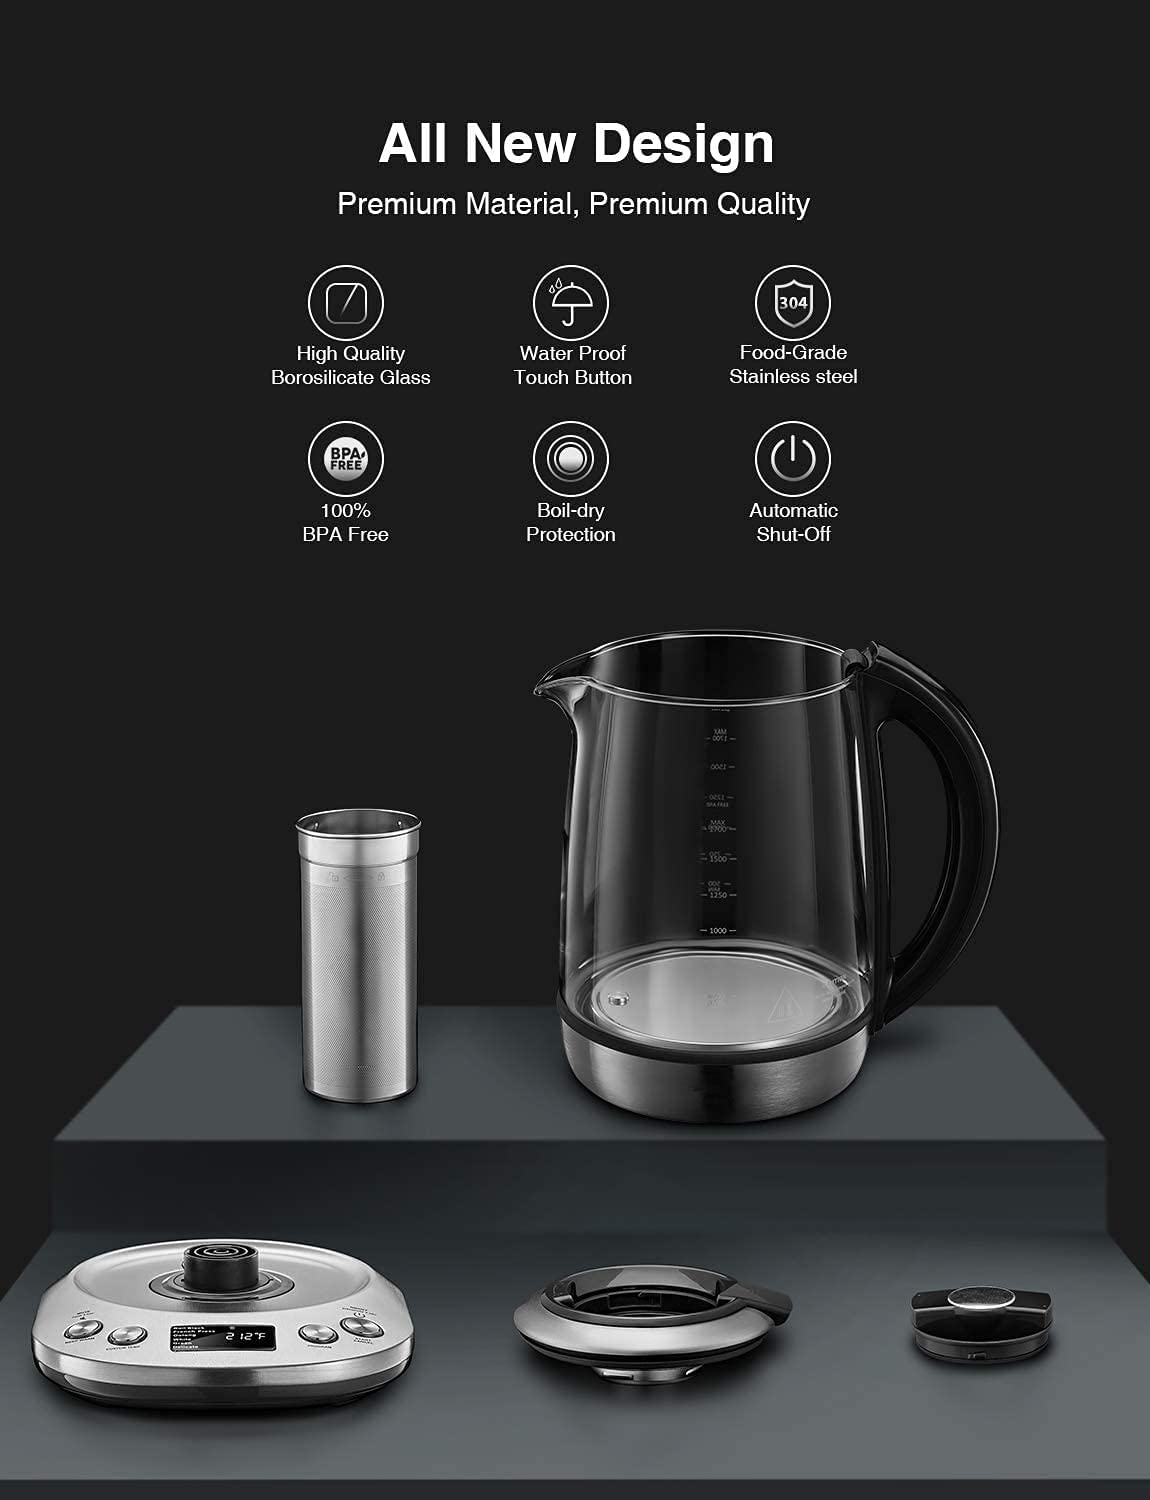 Decen Electric Tea Kettle, 1200W Variable Temperature Smart Tea Maker, Fast Boil Electric Glass Kettle with 2Hr Keep Warm Function, Premium Stainless Steel, Boil-Dry Protection, 1.7L